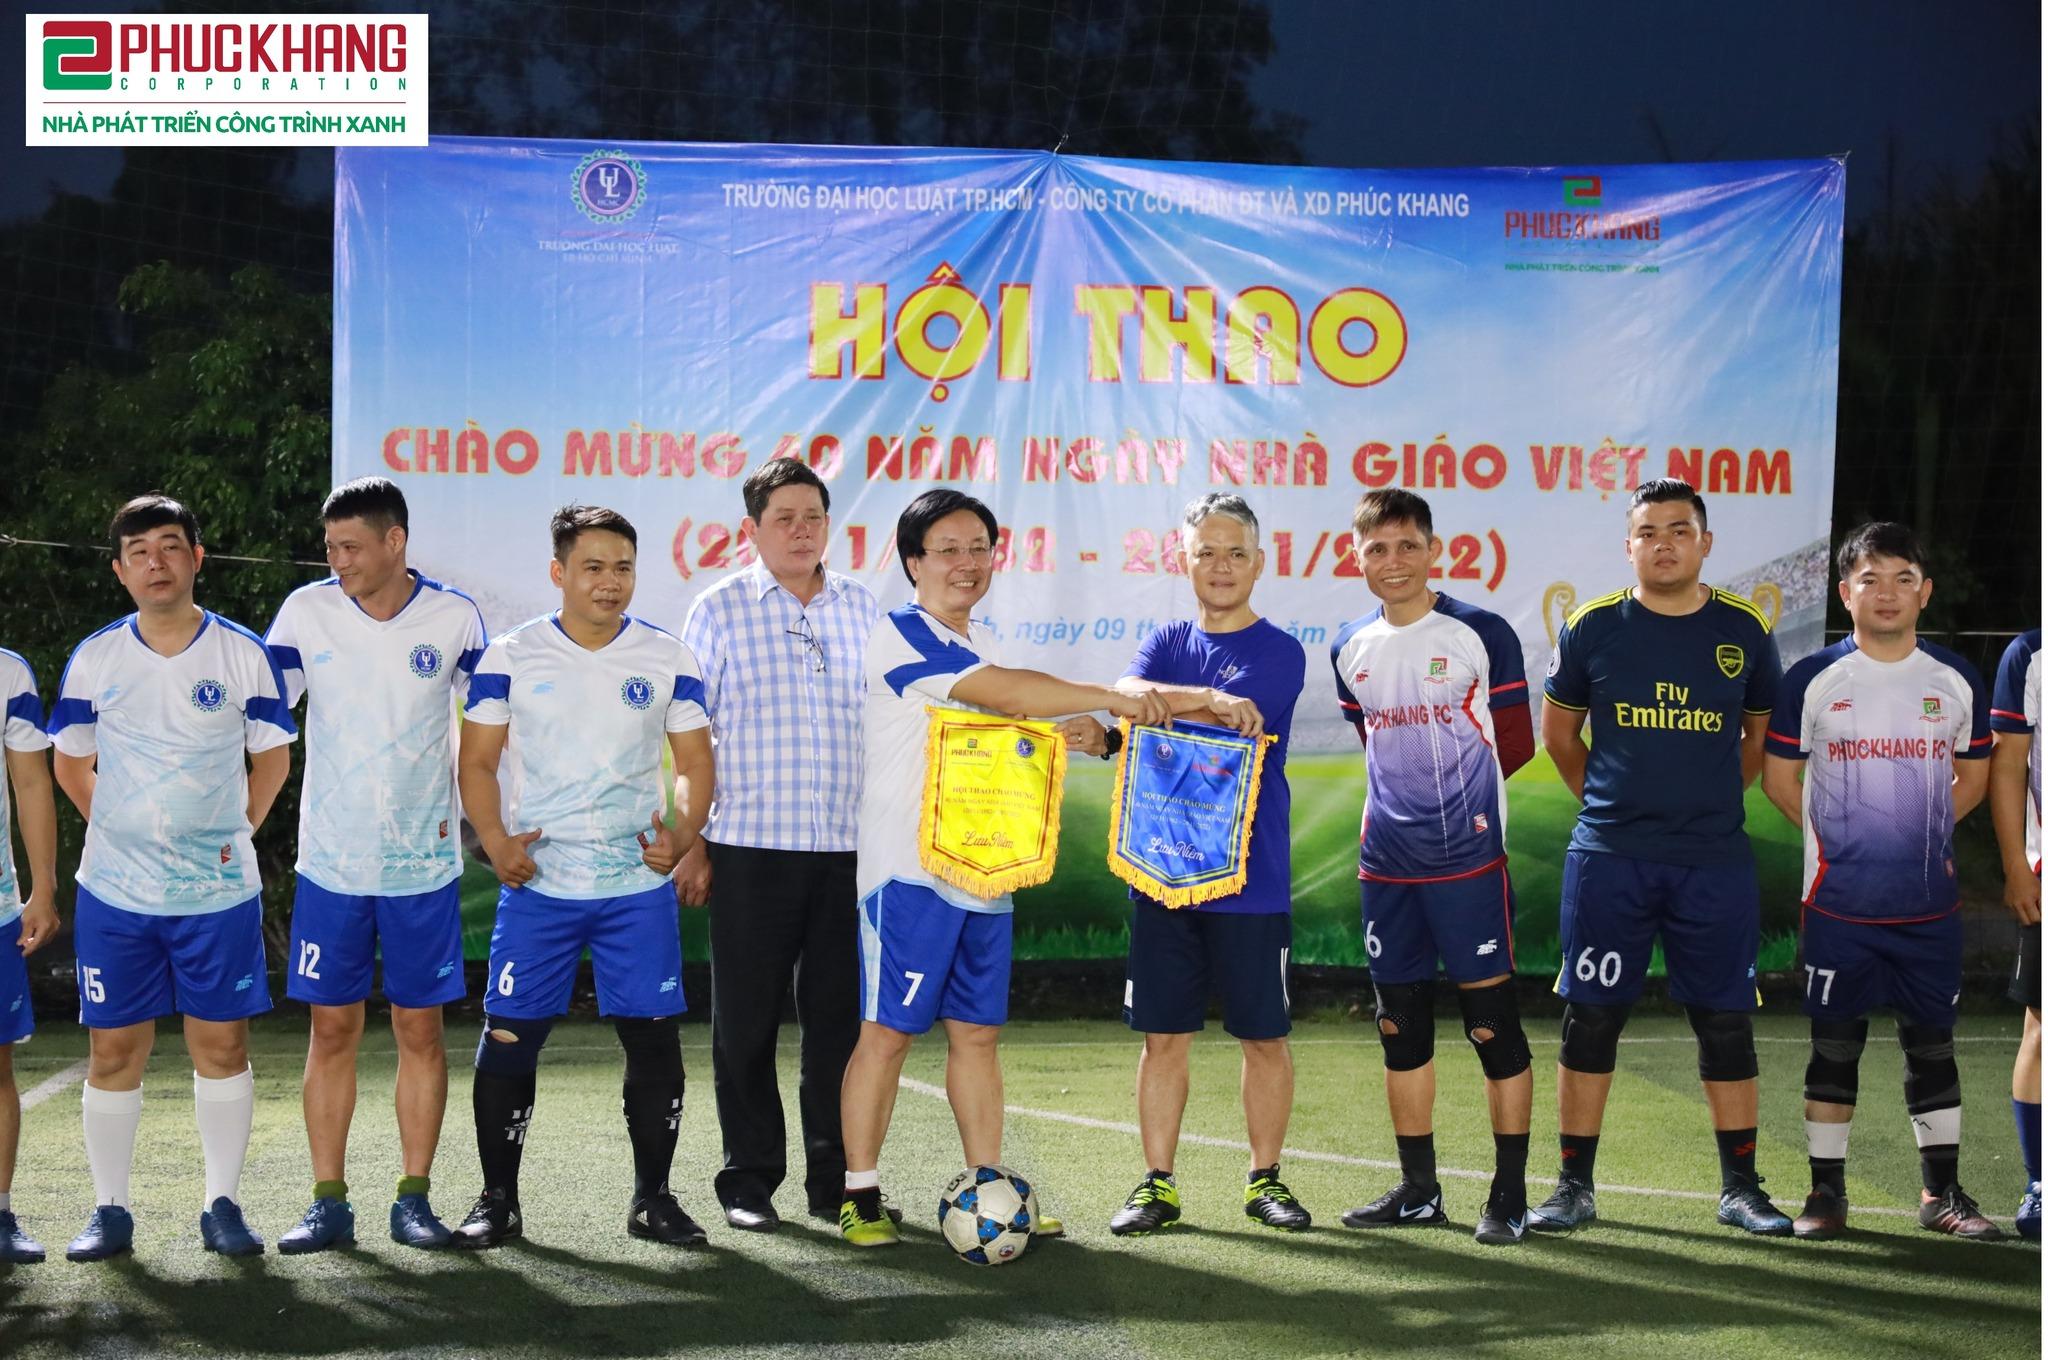 A sports competition between Phuc Khang Corporation and the Ho Chi Minh City University of Law.